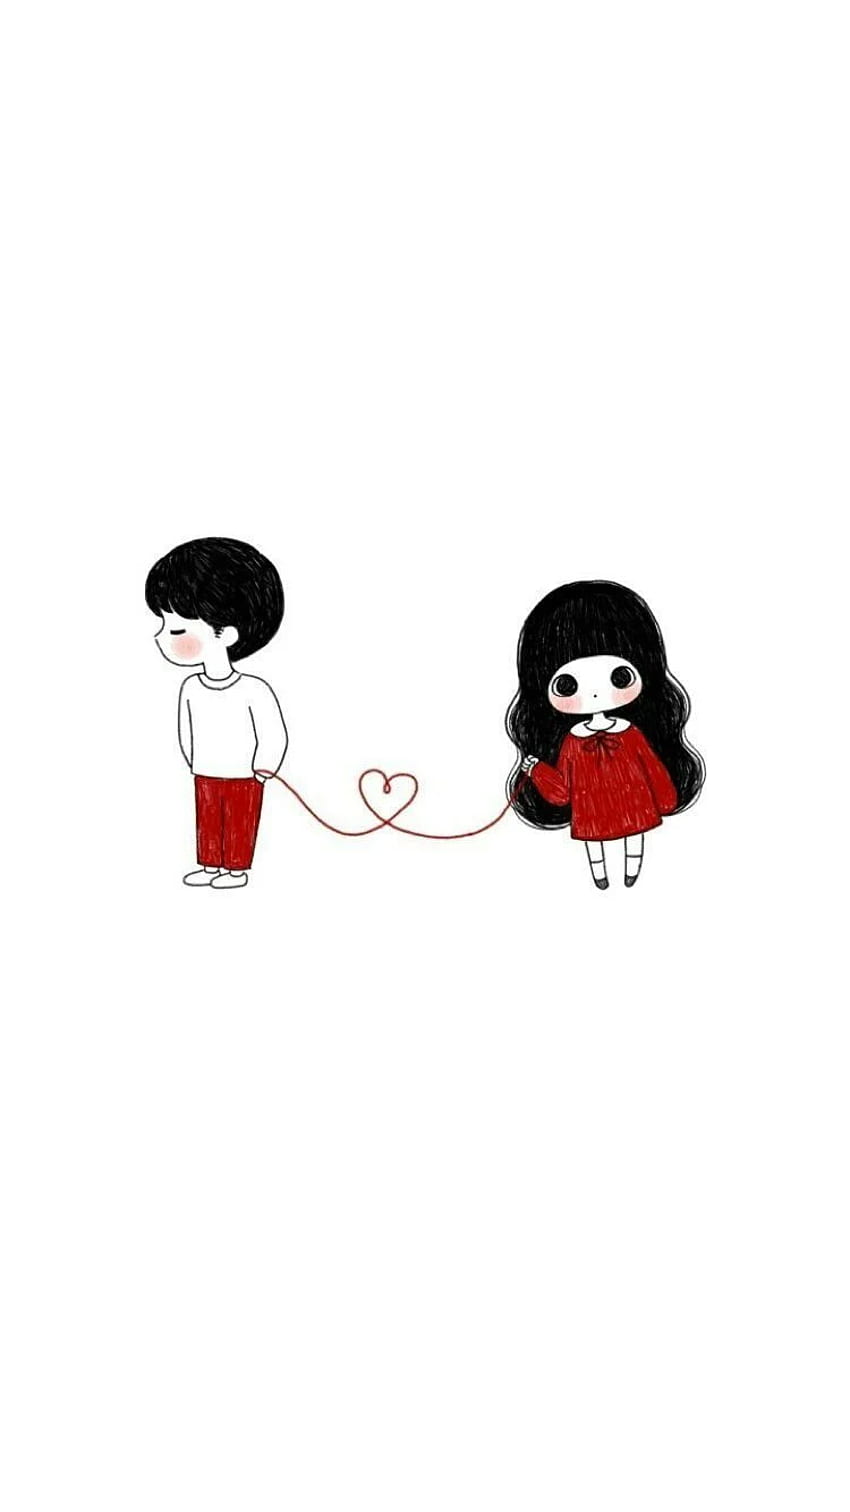 Cute Couple Drawings - Musely-saigonsouth.com.vn